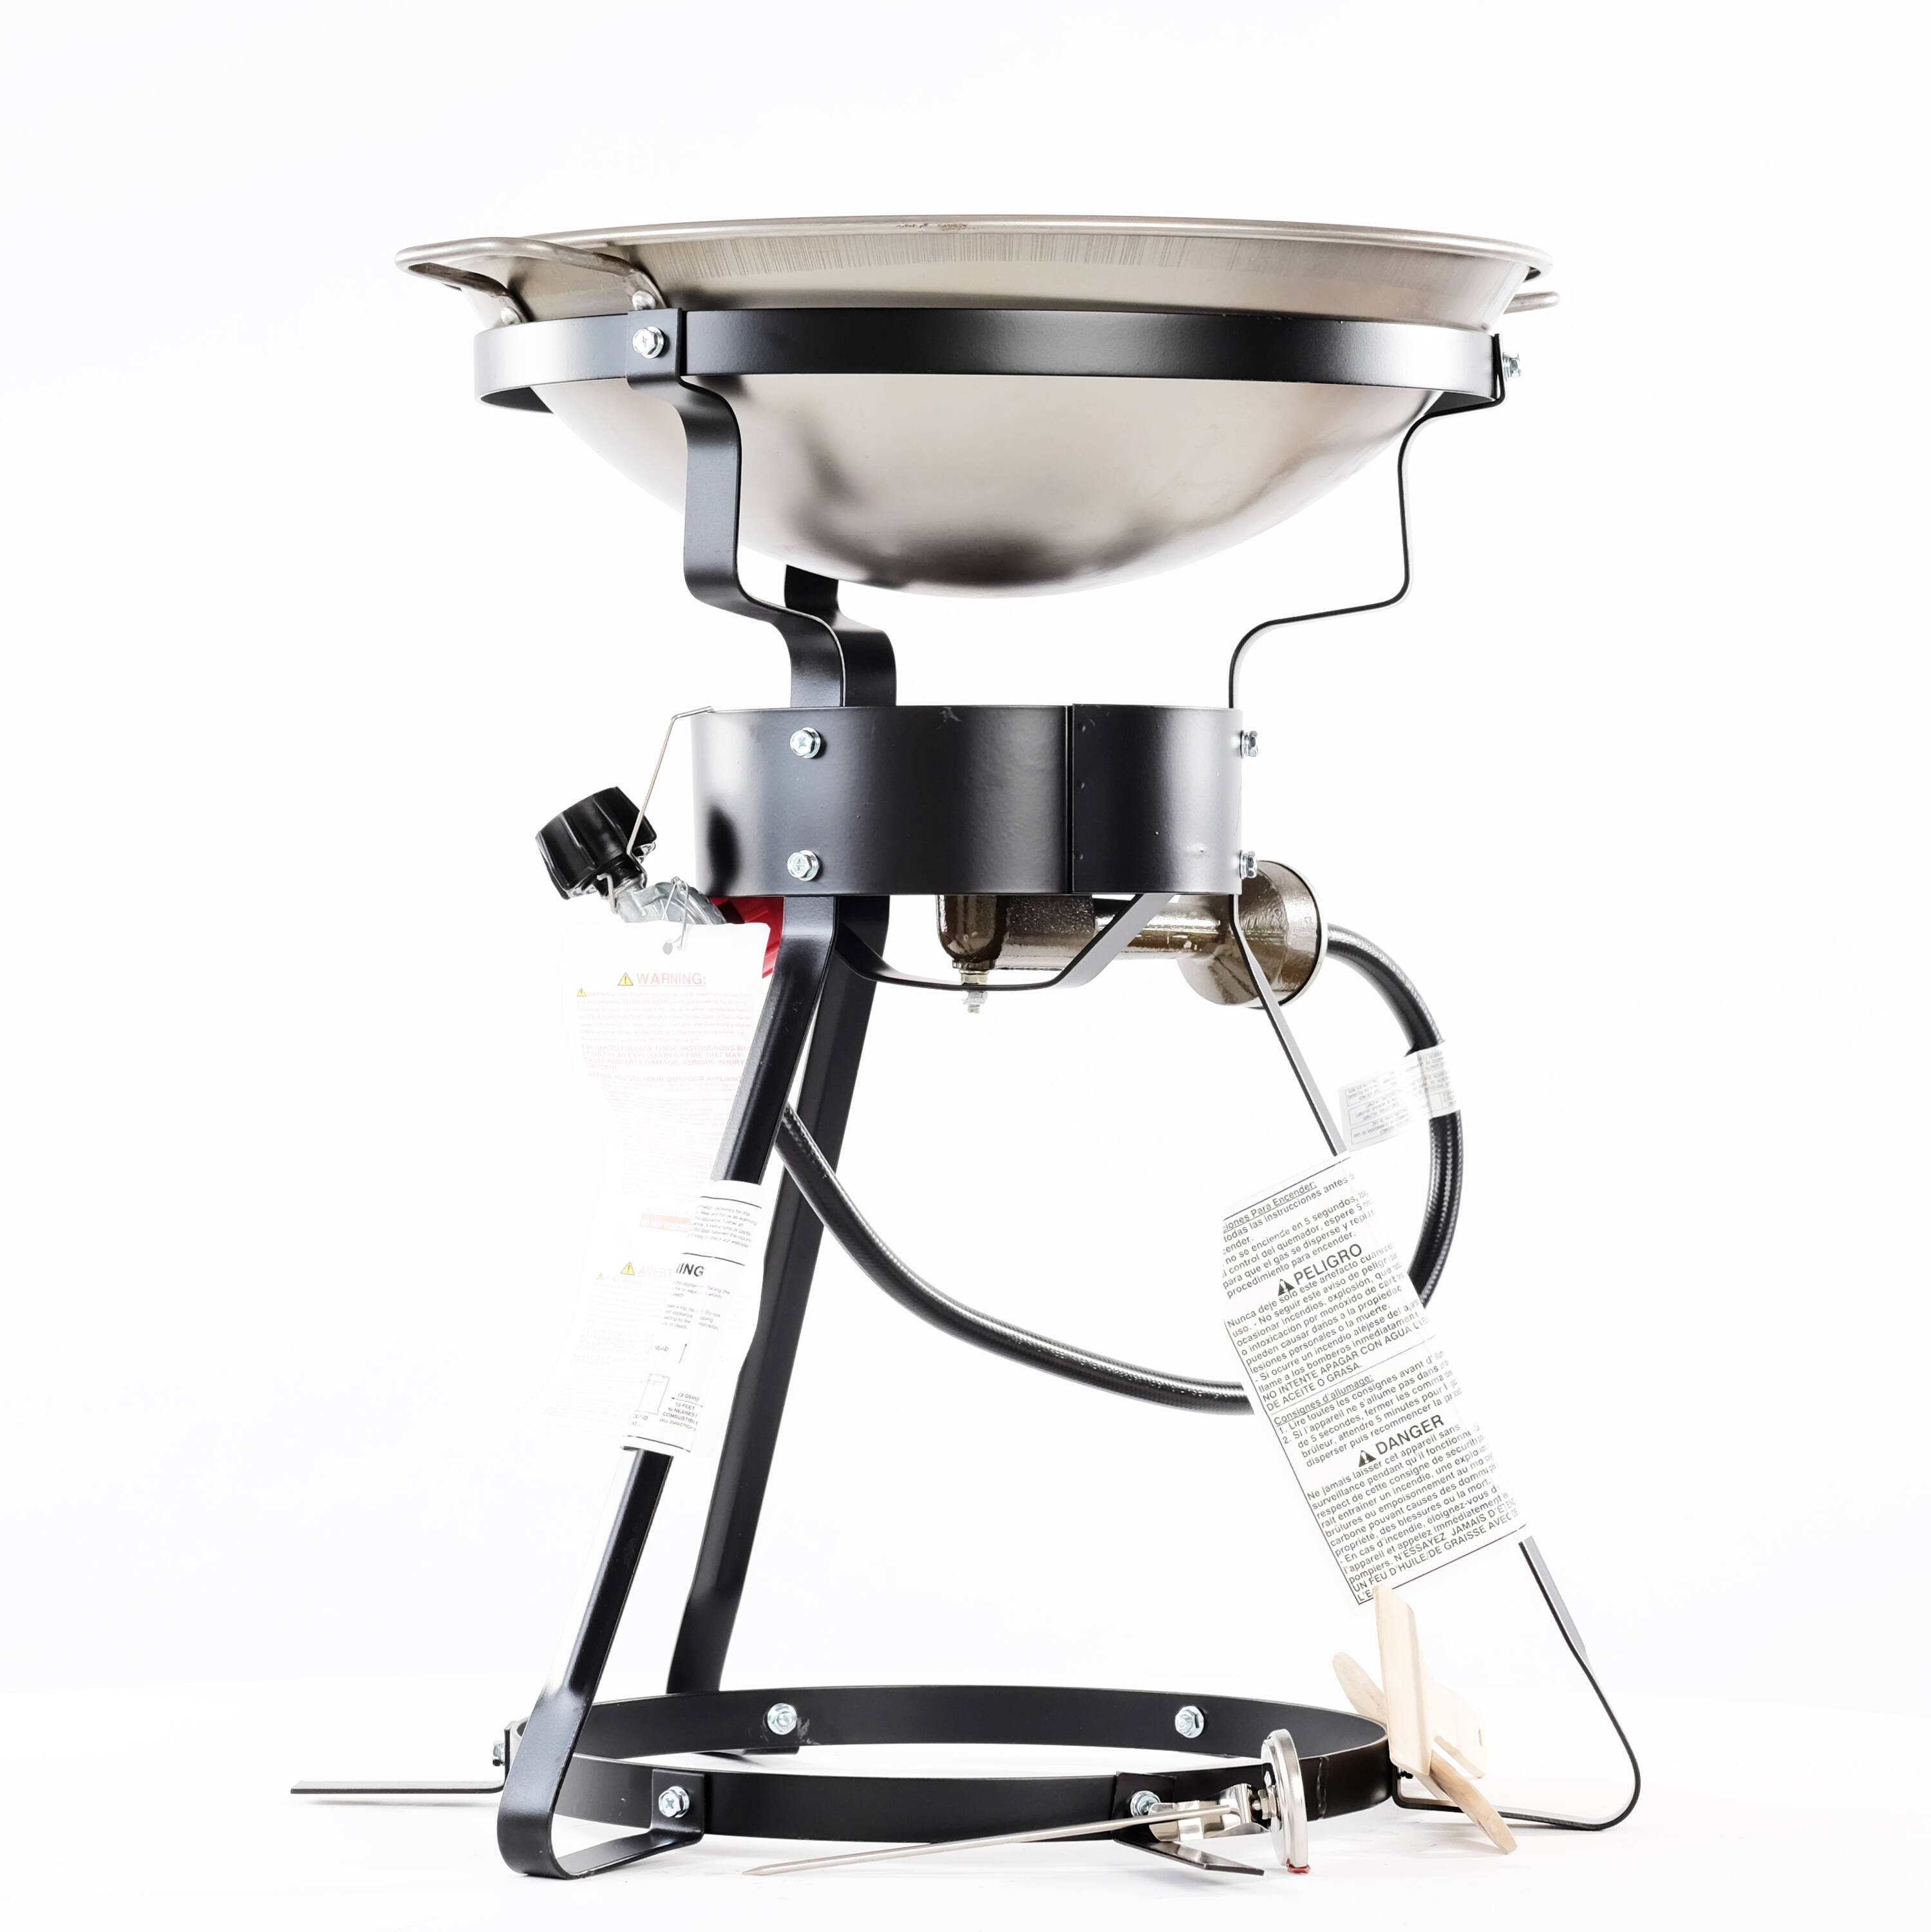 Wok Cooking Outdoor Burners & Stoves at